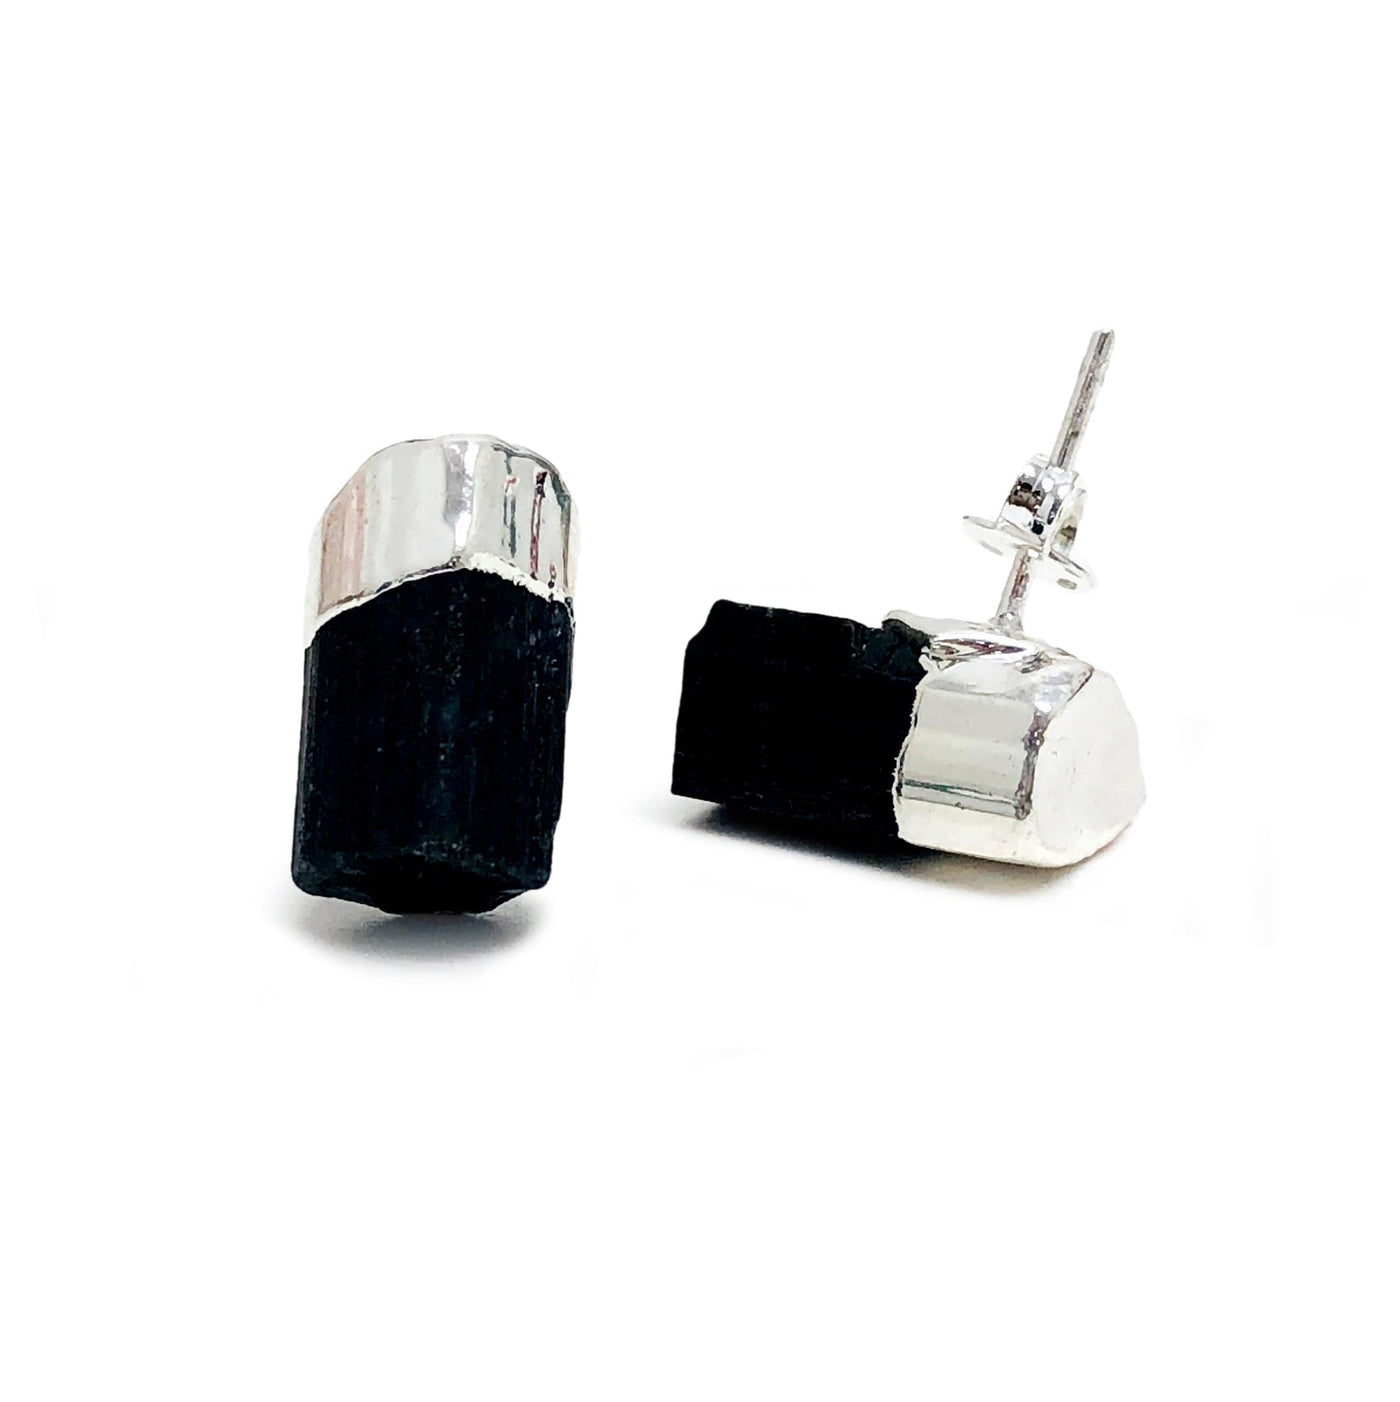 Black tourmaline small stud earrings with silver plated top on a white background.